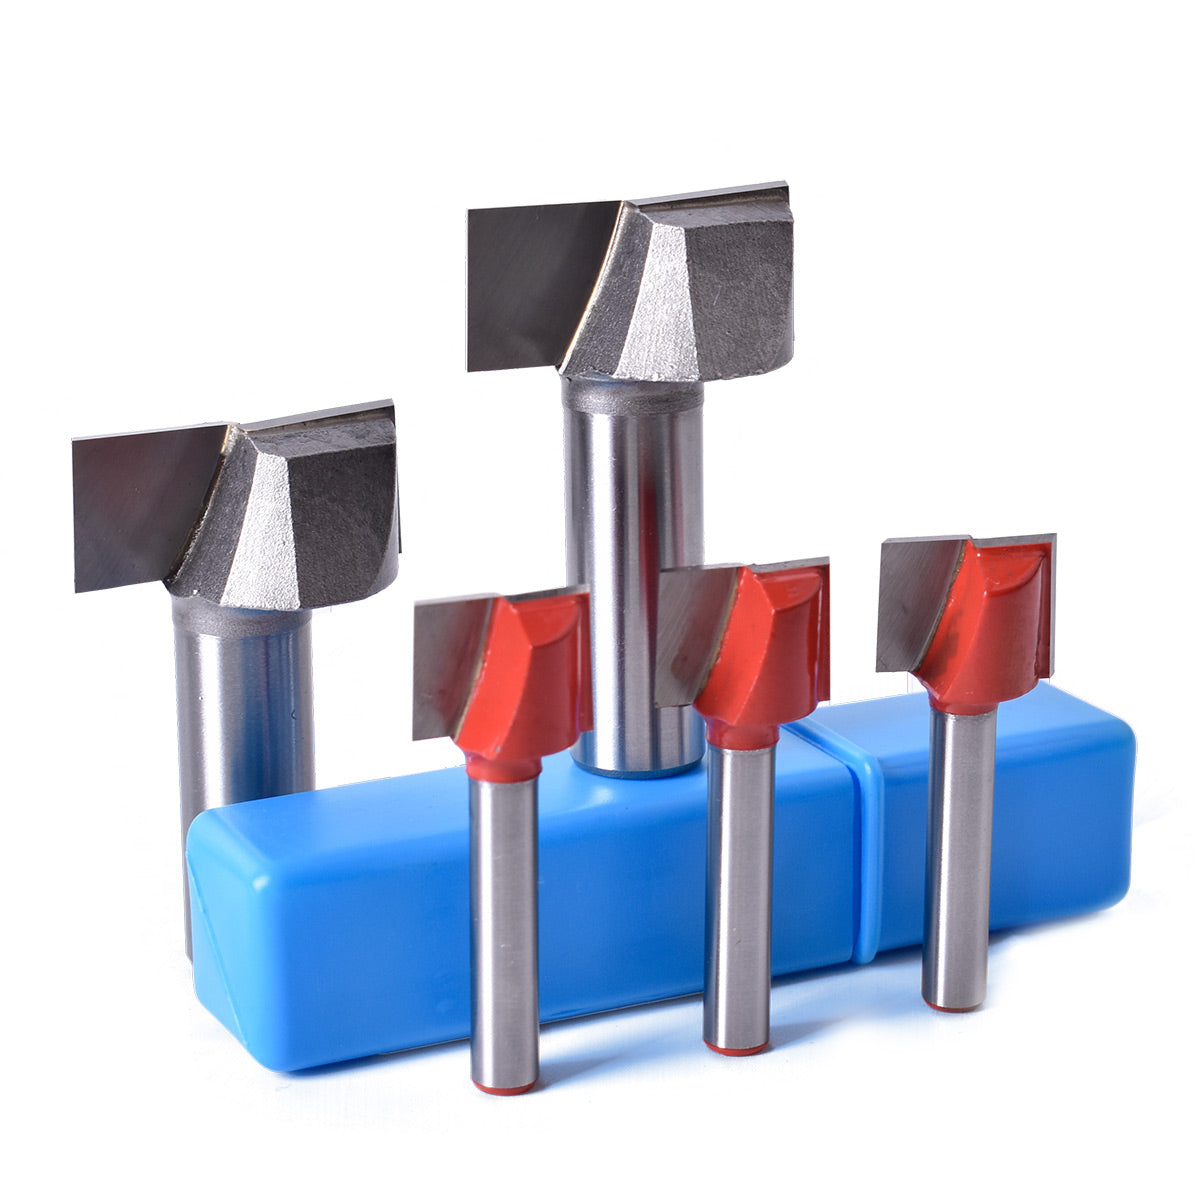 Startnow 5PCS Cleaning Bottom Router Bits Milling Cutters For Organic Board MDF Wood PVC CNC Tool Router Engraving Bit End Mills